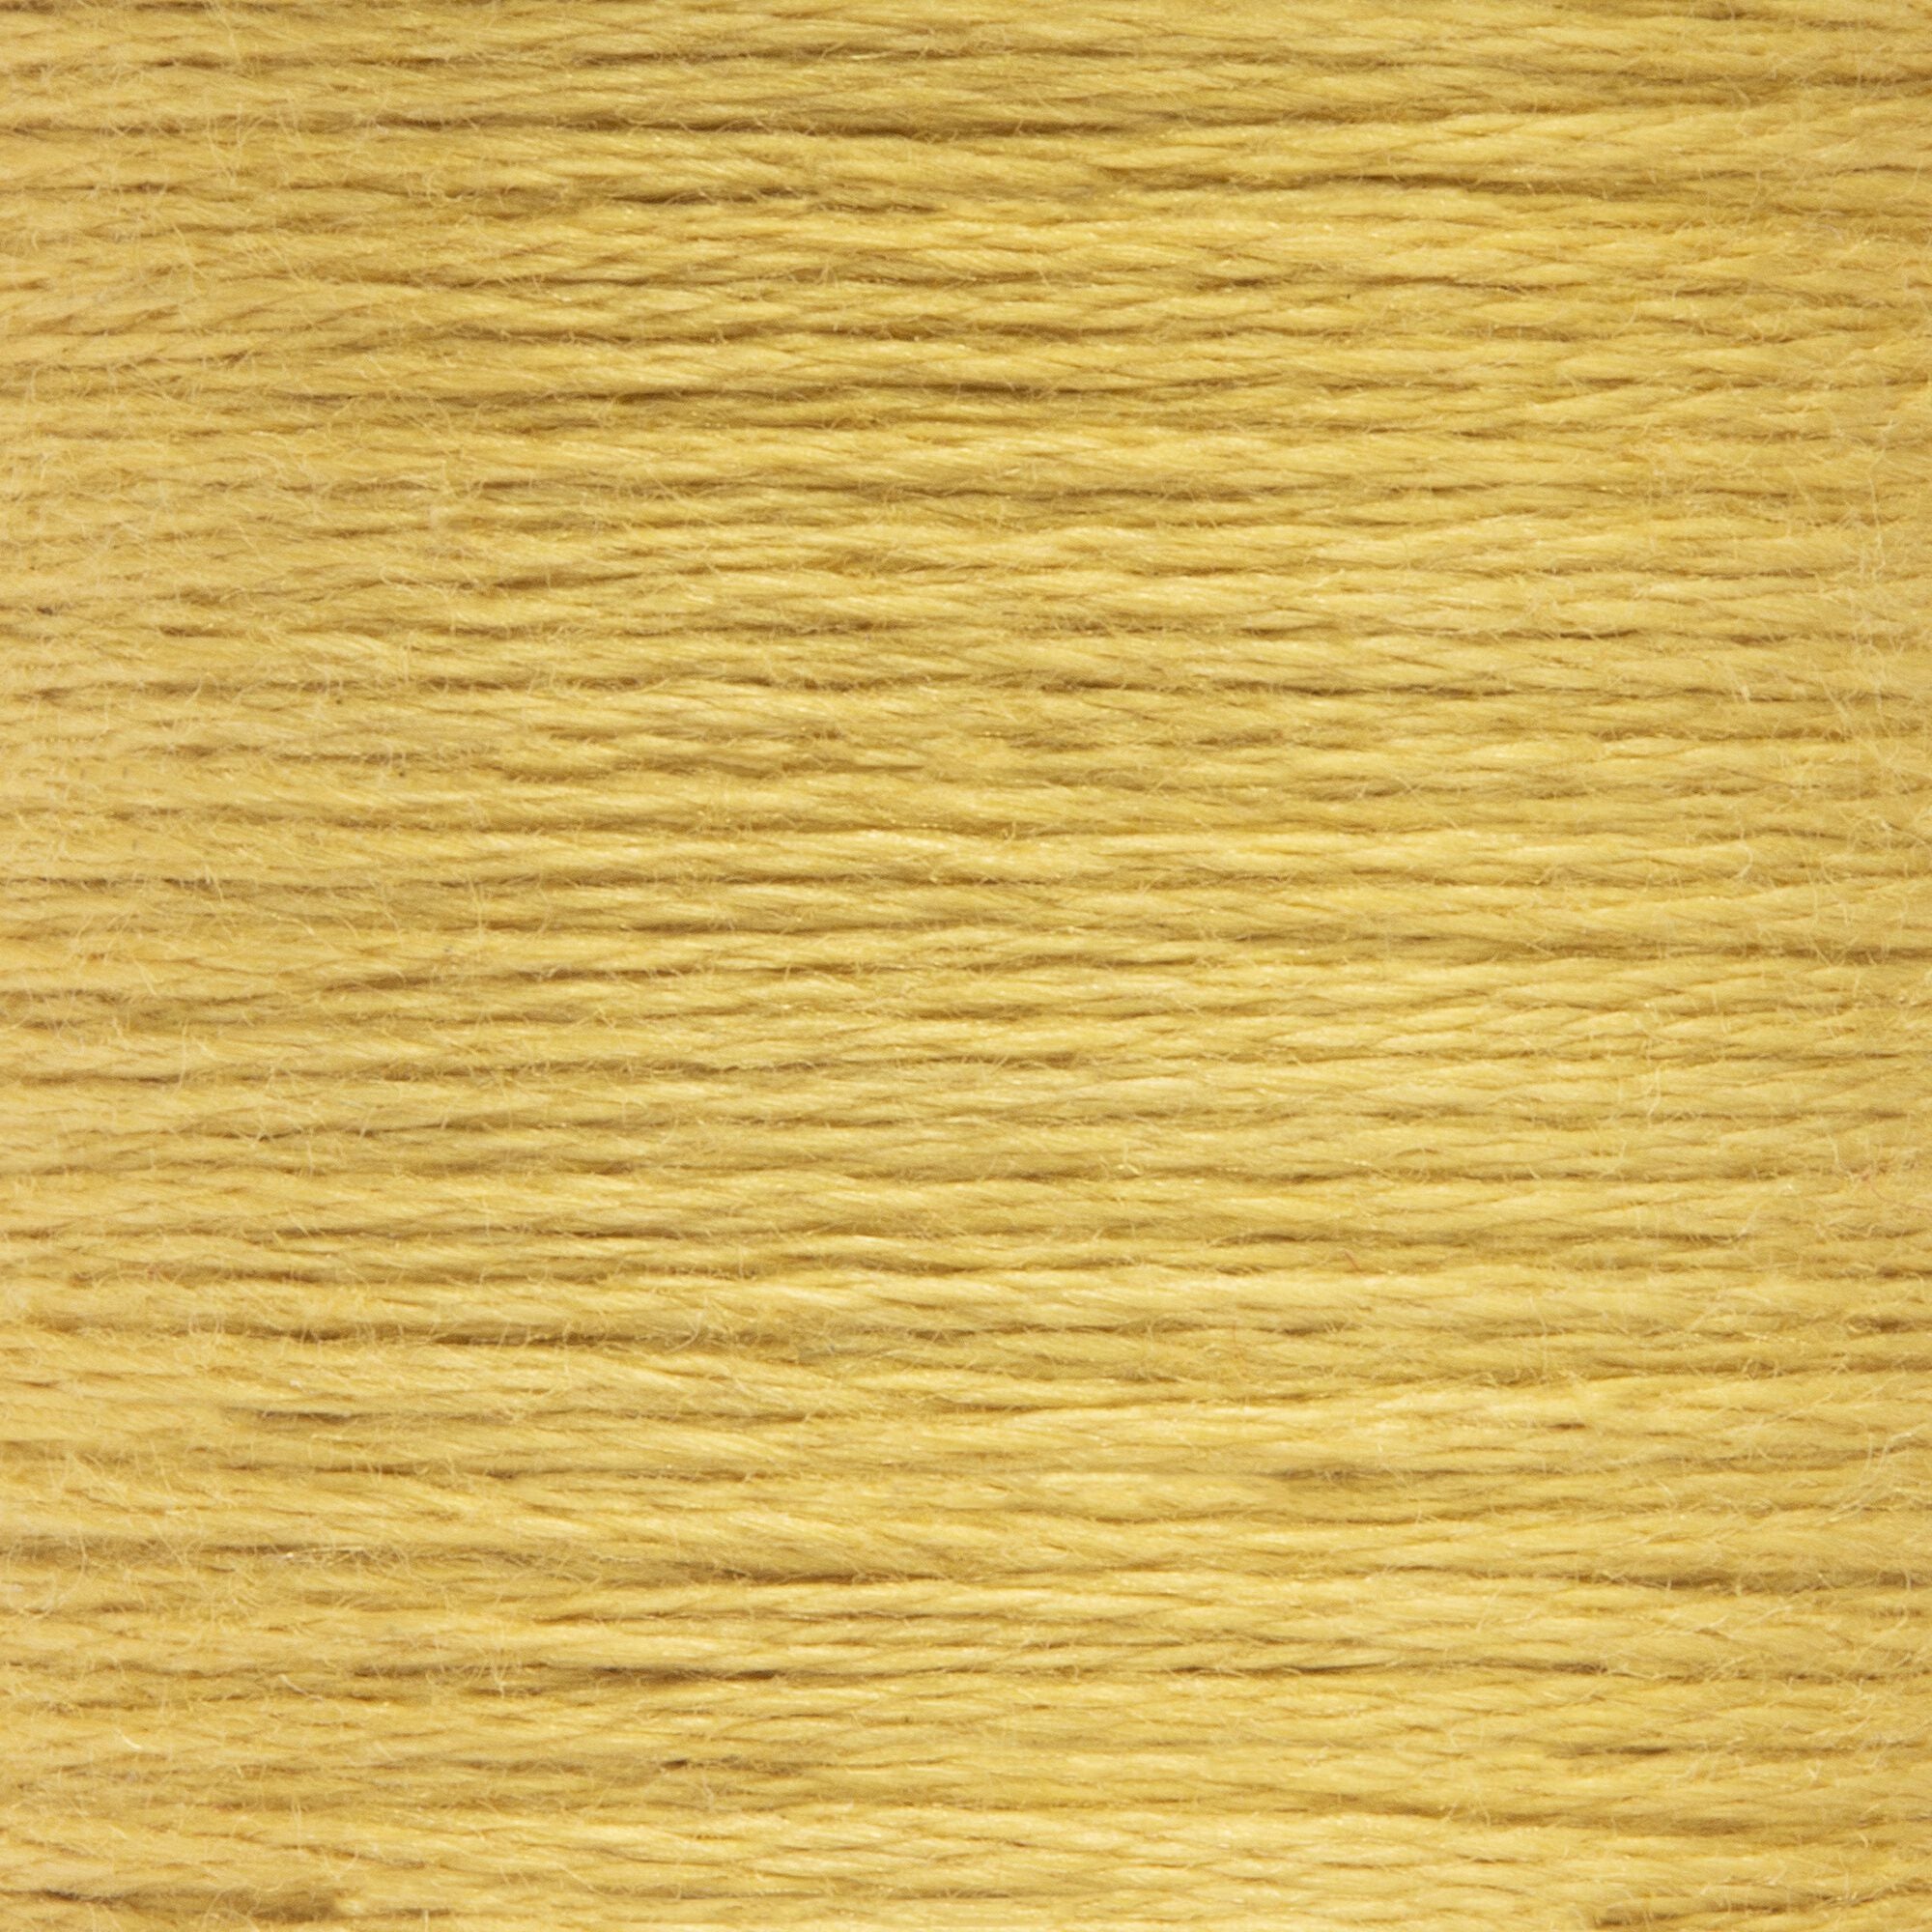 Anchor Embroidery Floss in Saffron Med